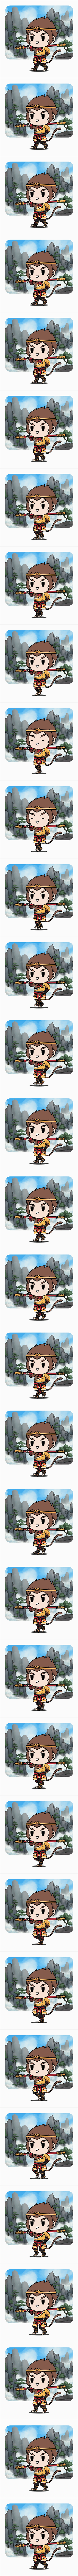 Go BaBy Go !! #470 [Wukong - Journey to the West]